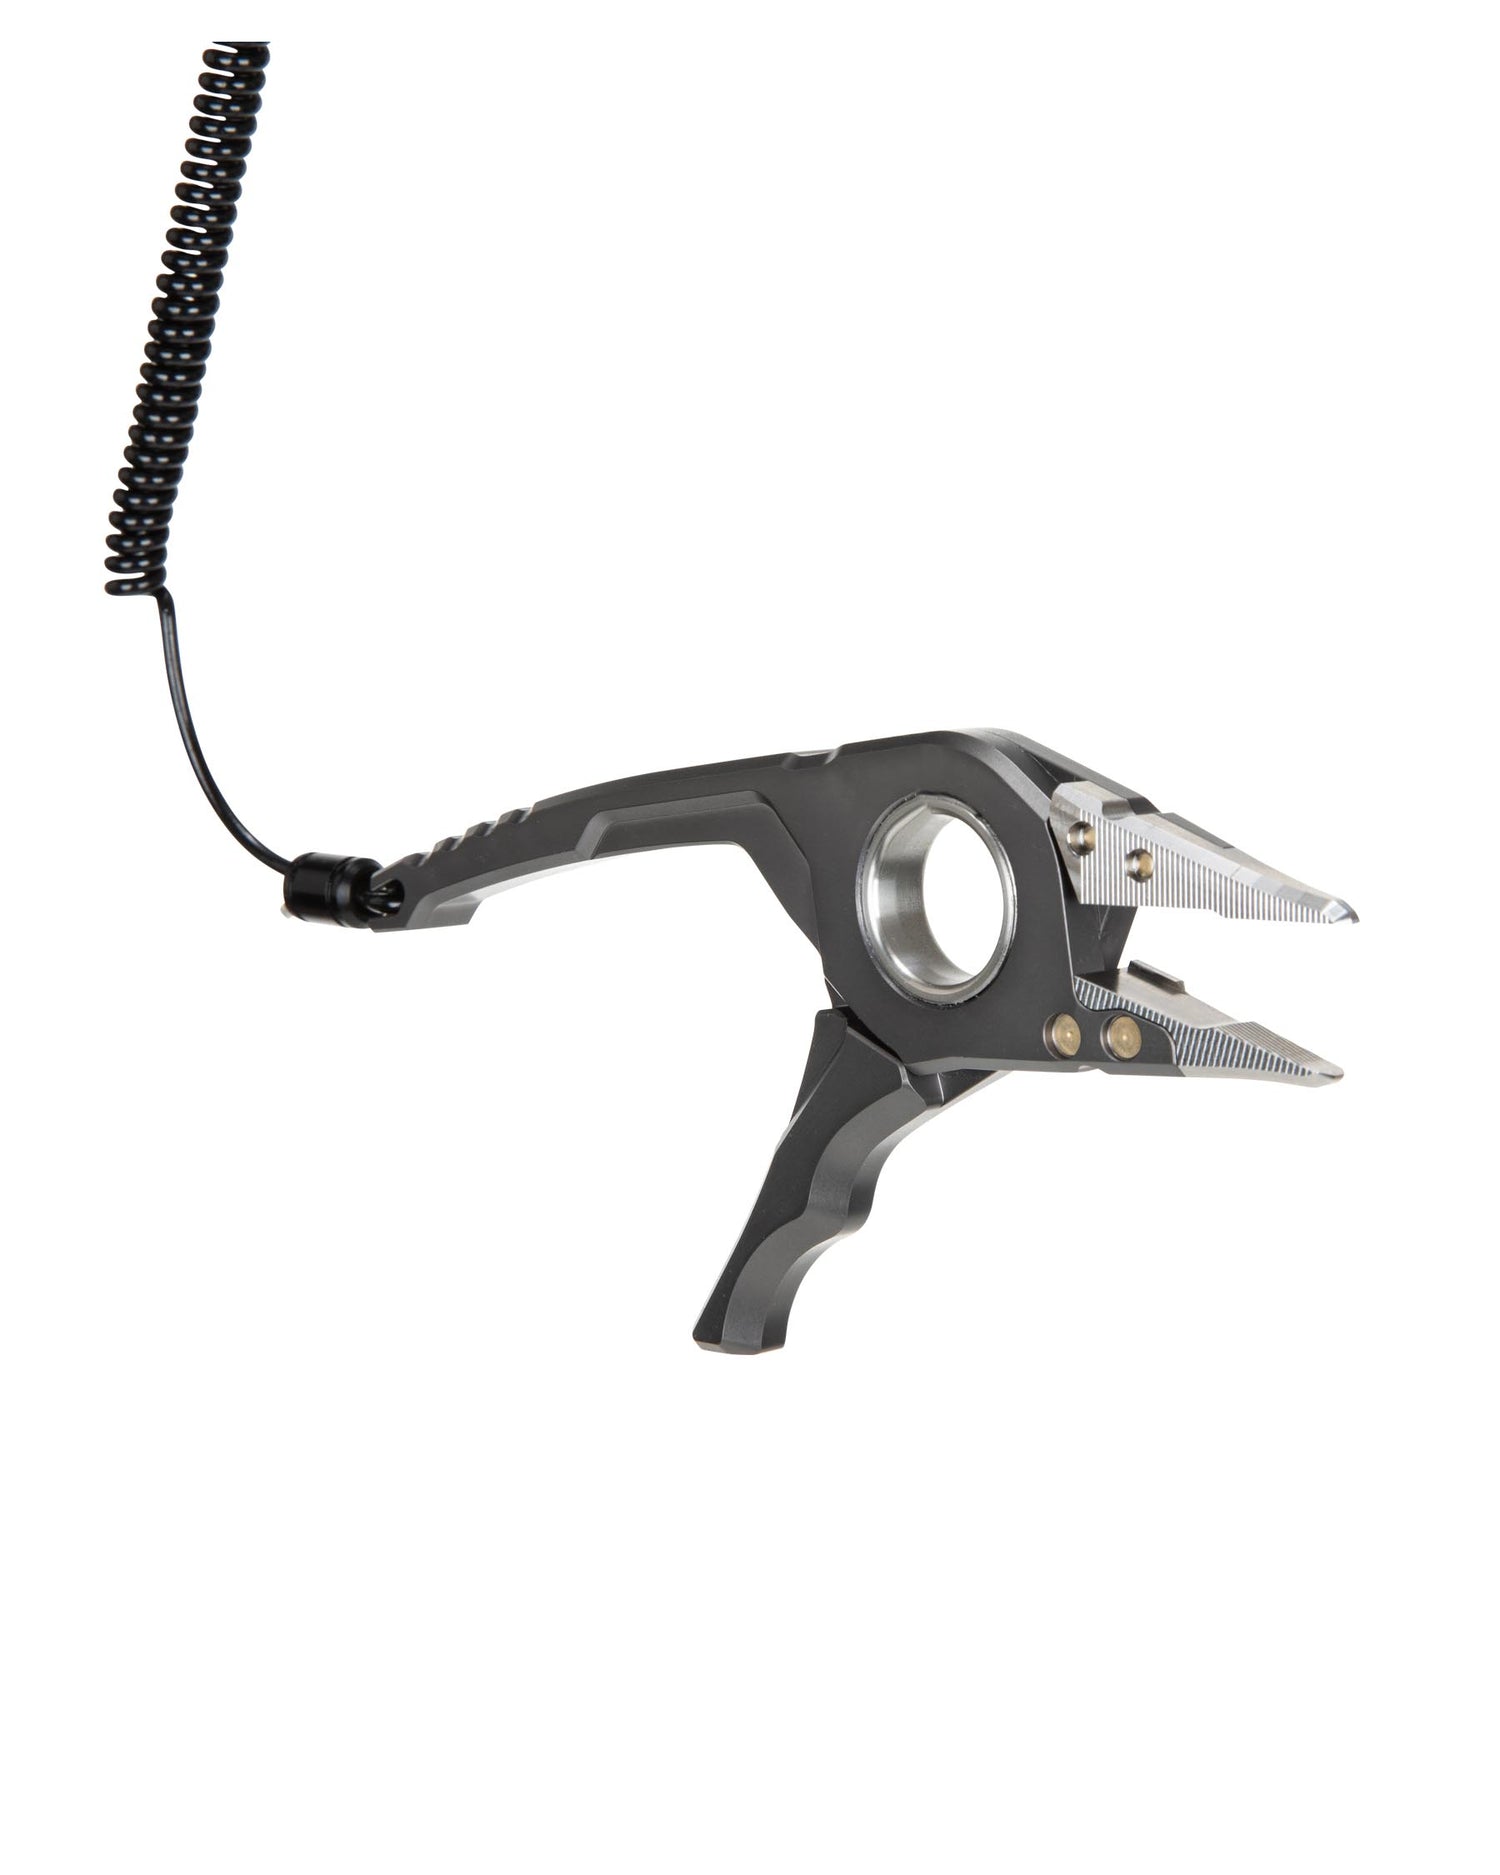 Fishing Pliers Carbon Steel - Smith's Consumer Products